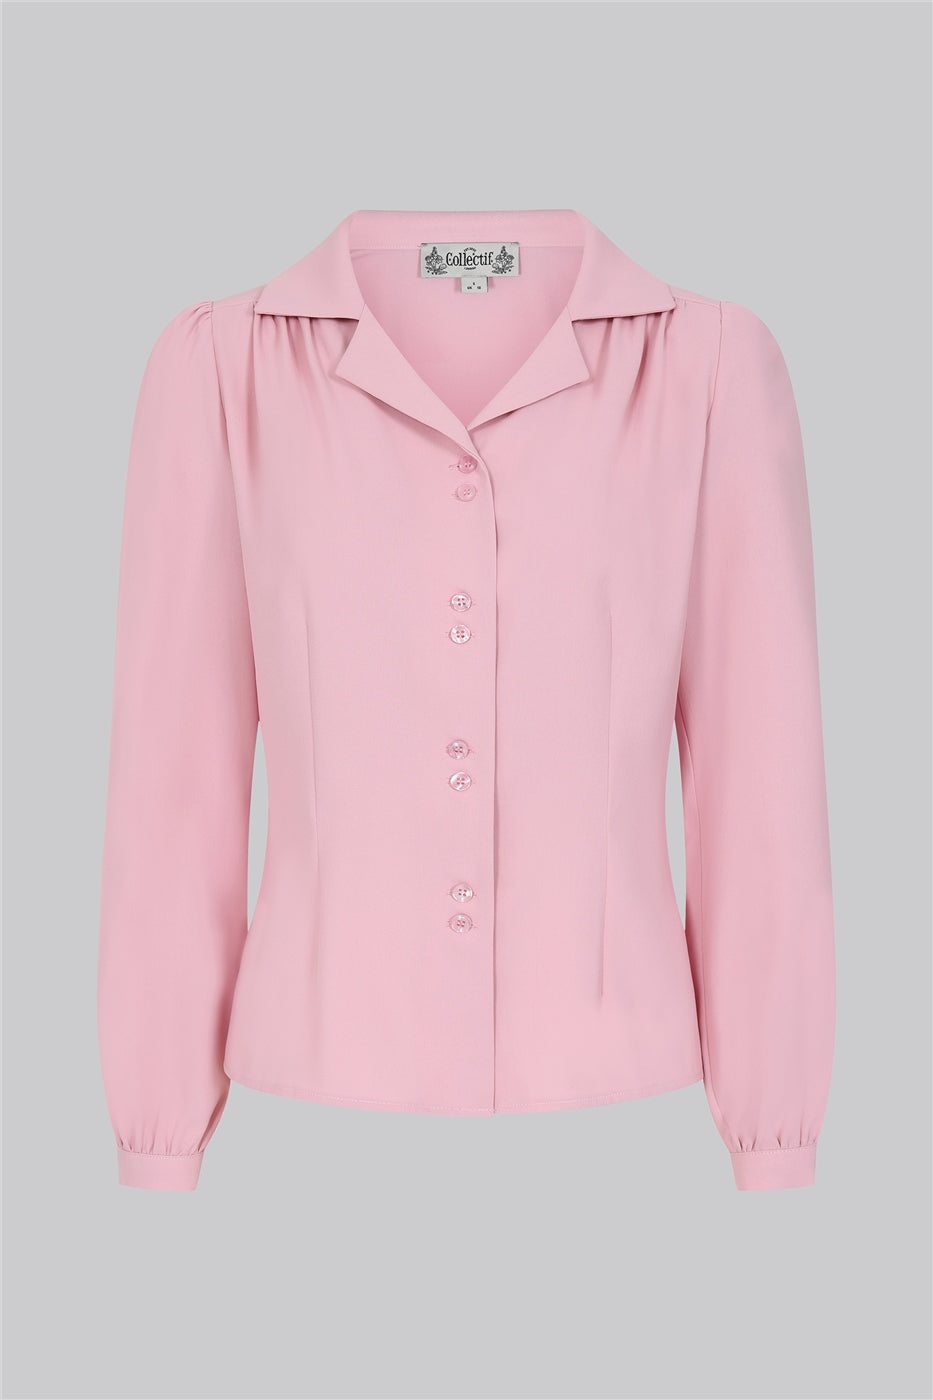 Pink 1940s style blouse with a pretty collar, button front and semi fitted bodice